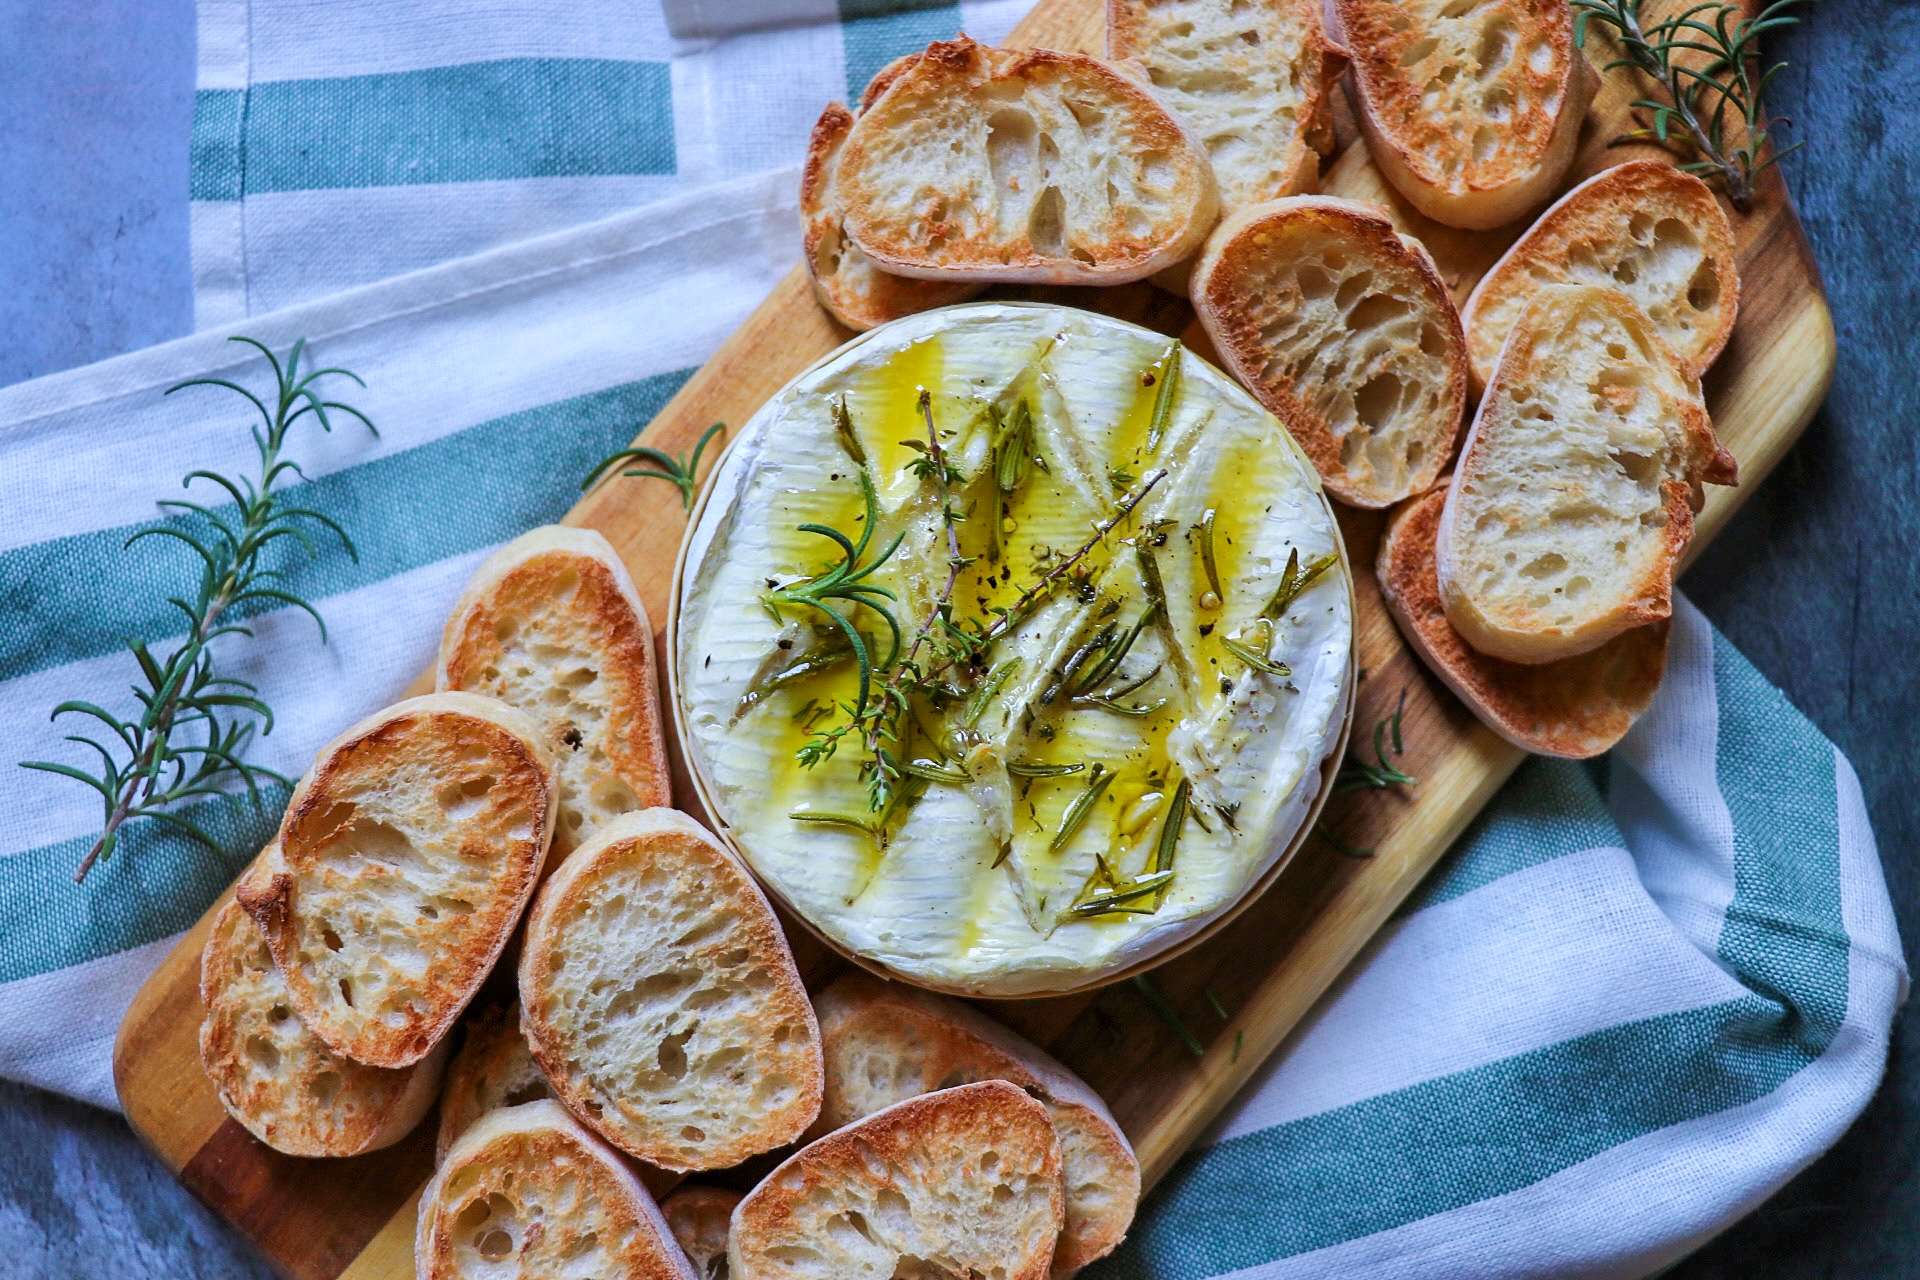 Garlic and Herb Baked Camembert (camembert baked in the box)